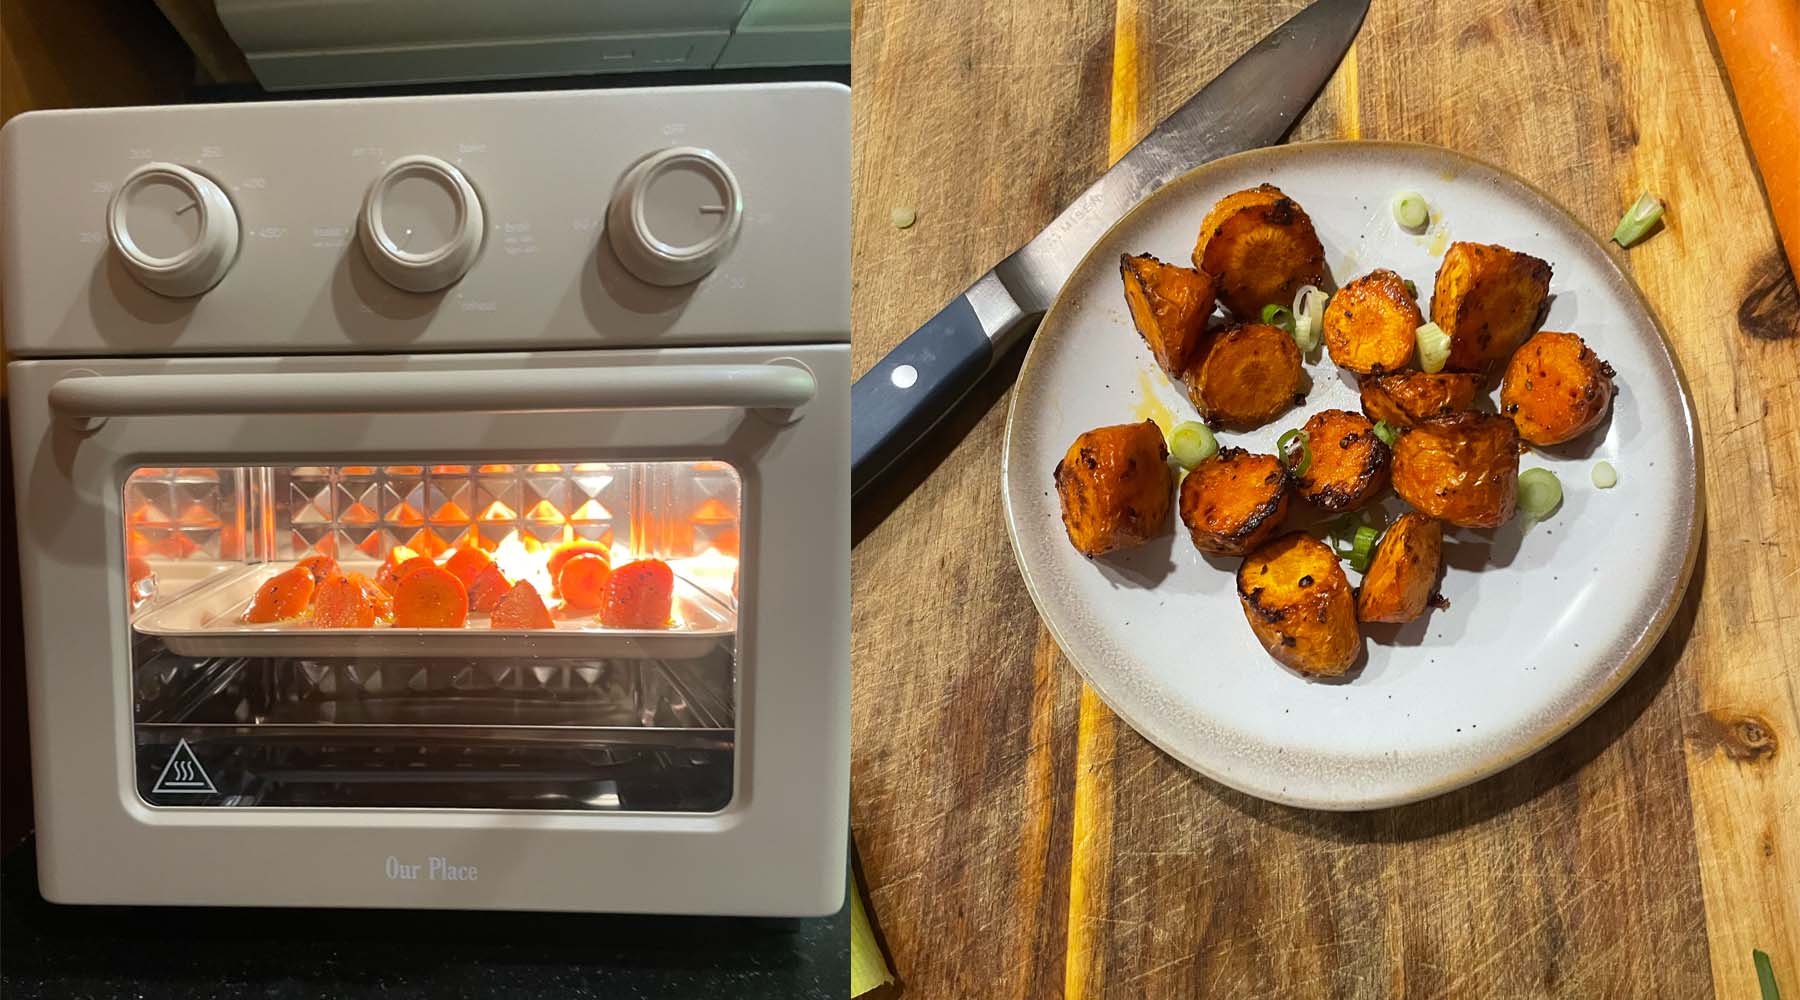 An Honest Review: Our Place's Wonder Oven (Almost) Does It All